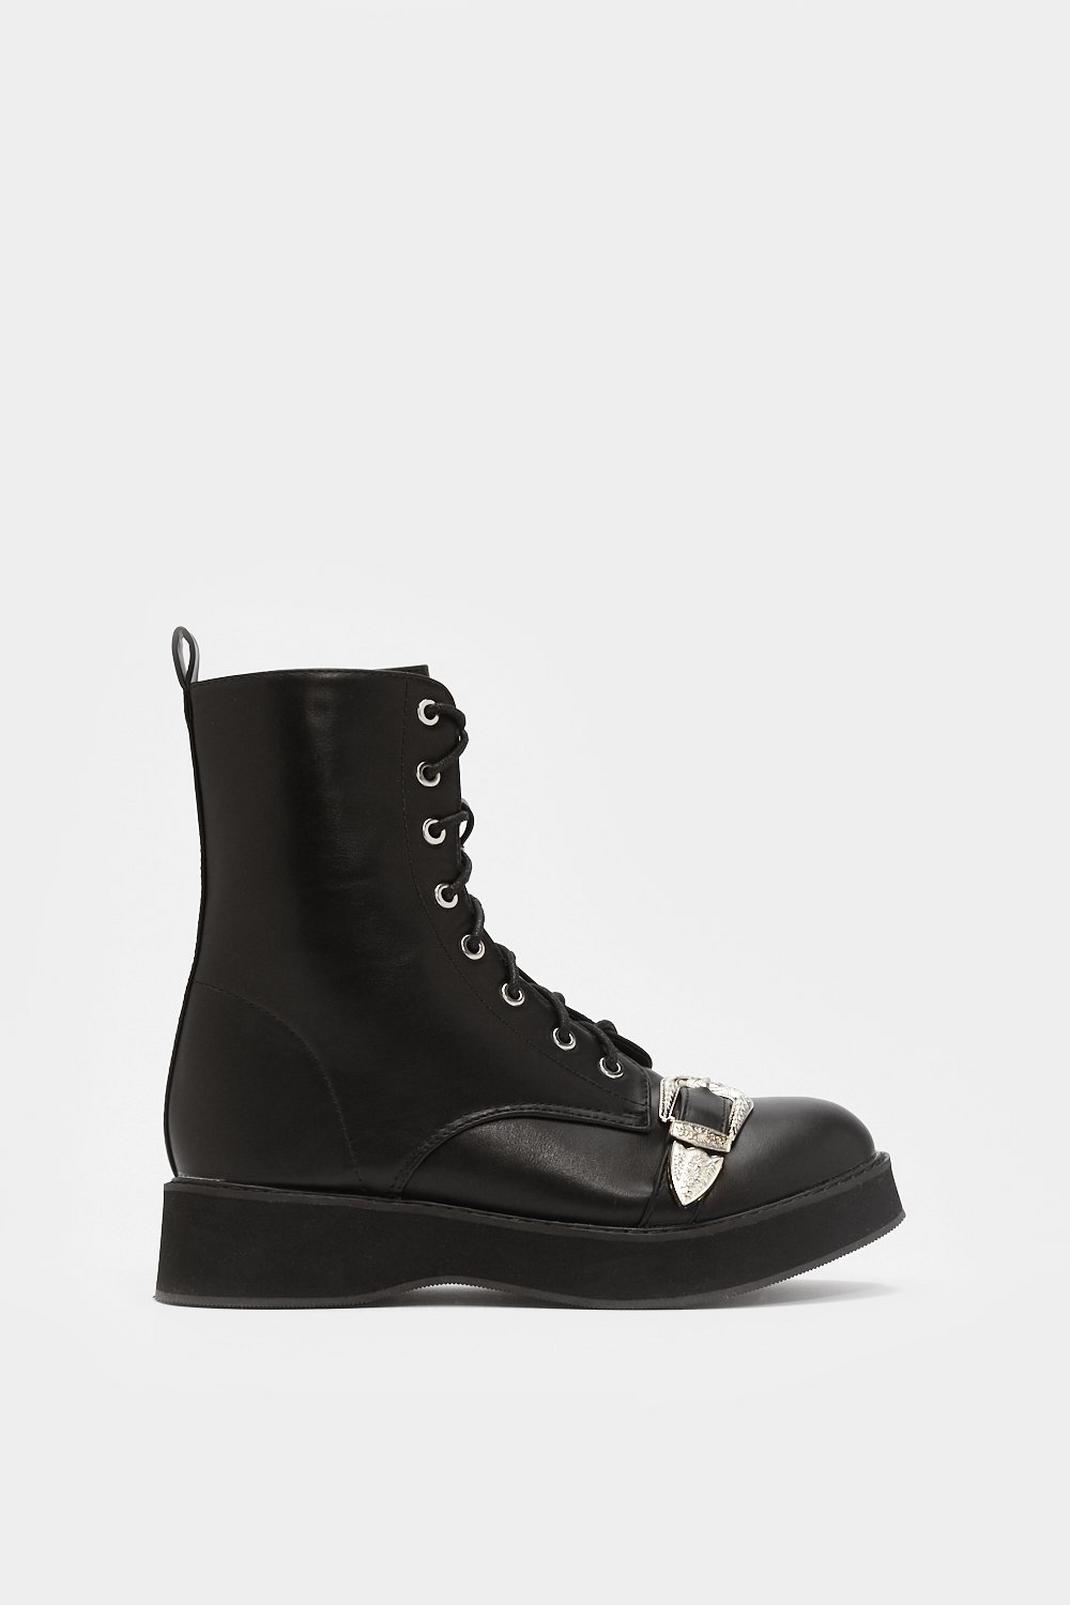 Don't Buckle Around Lace-Up Boot | Nasty Gal